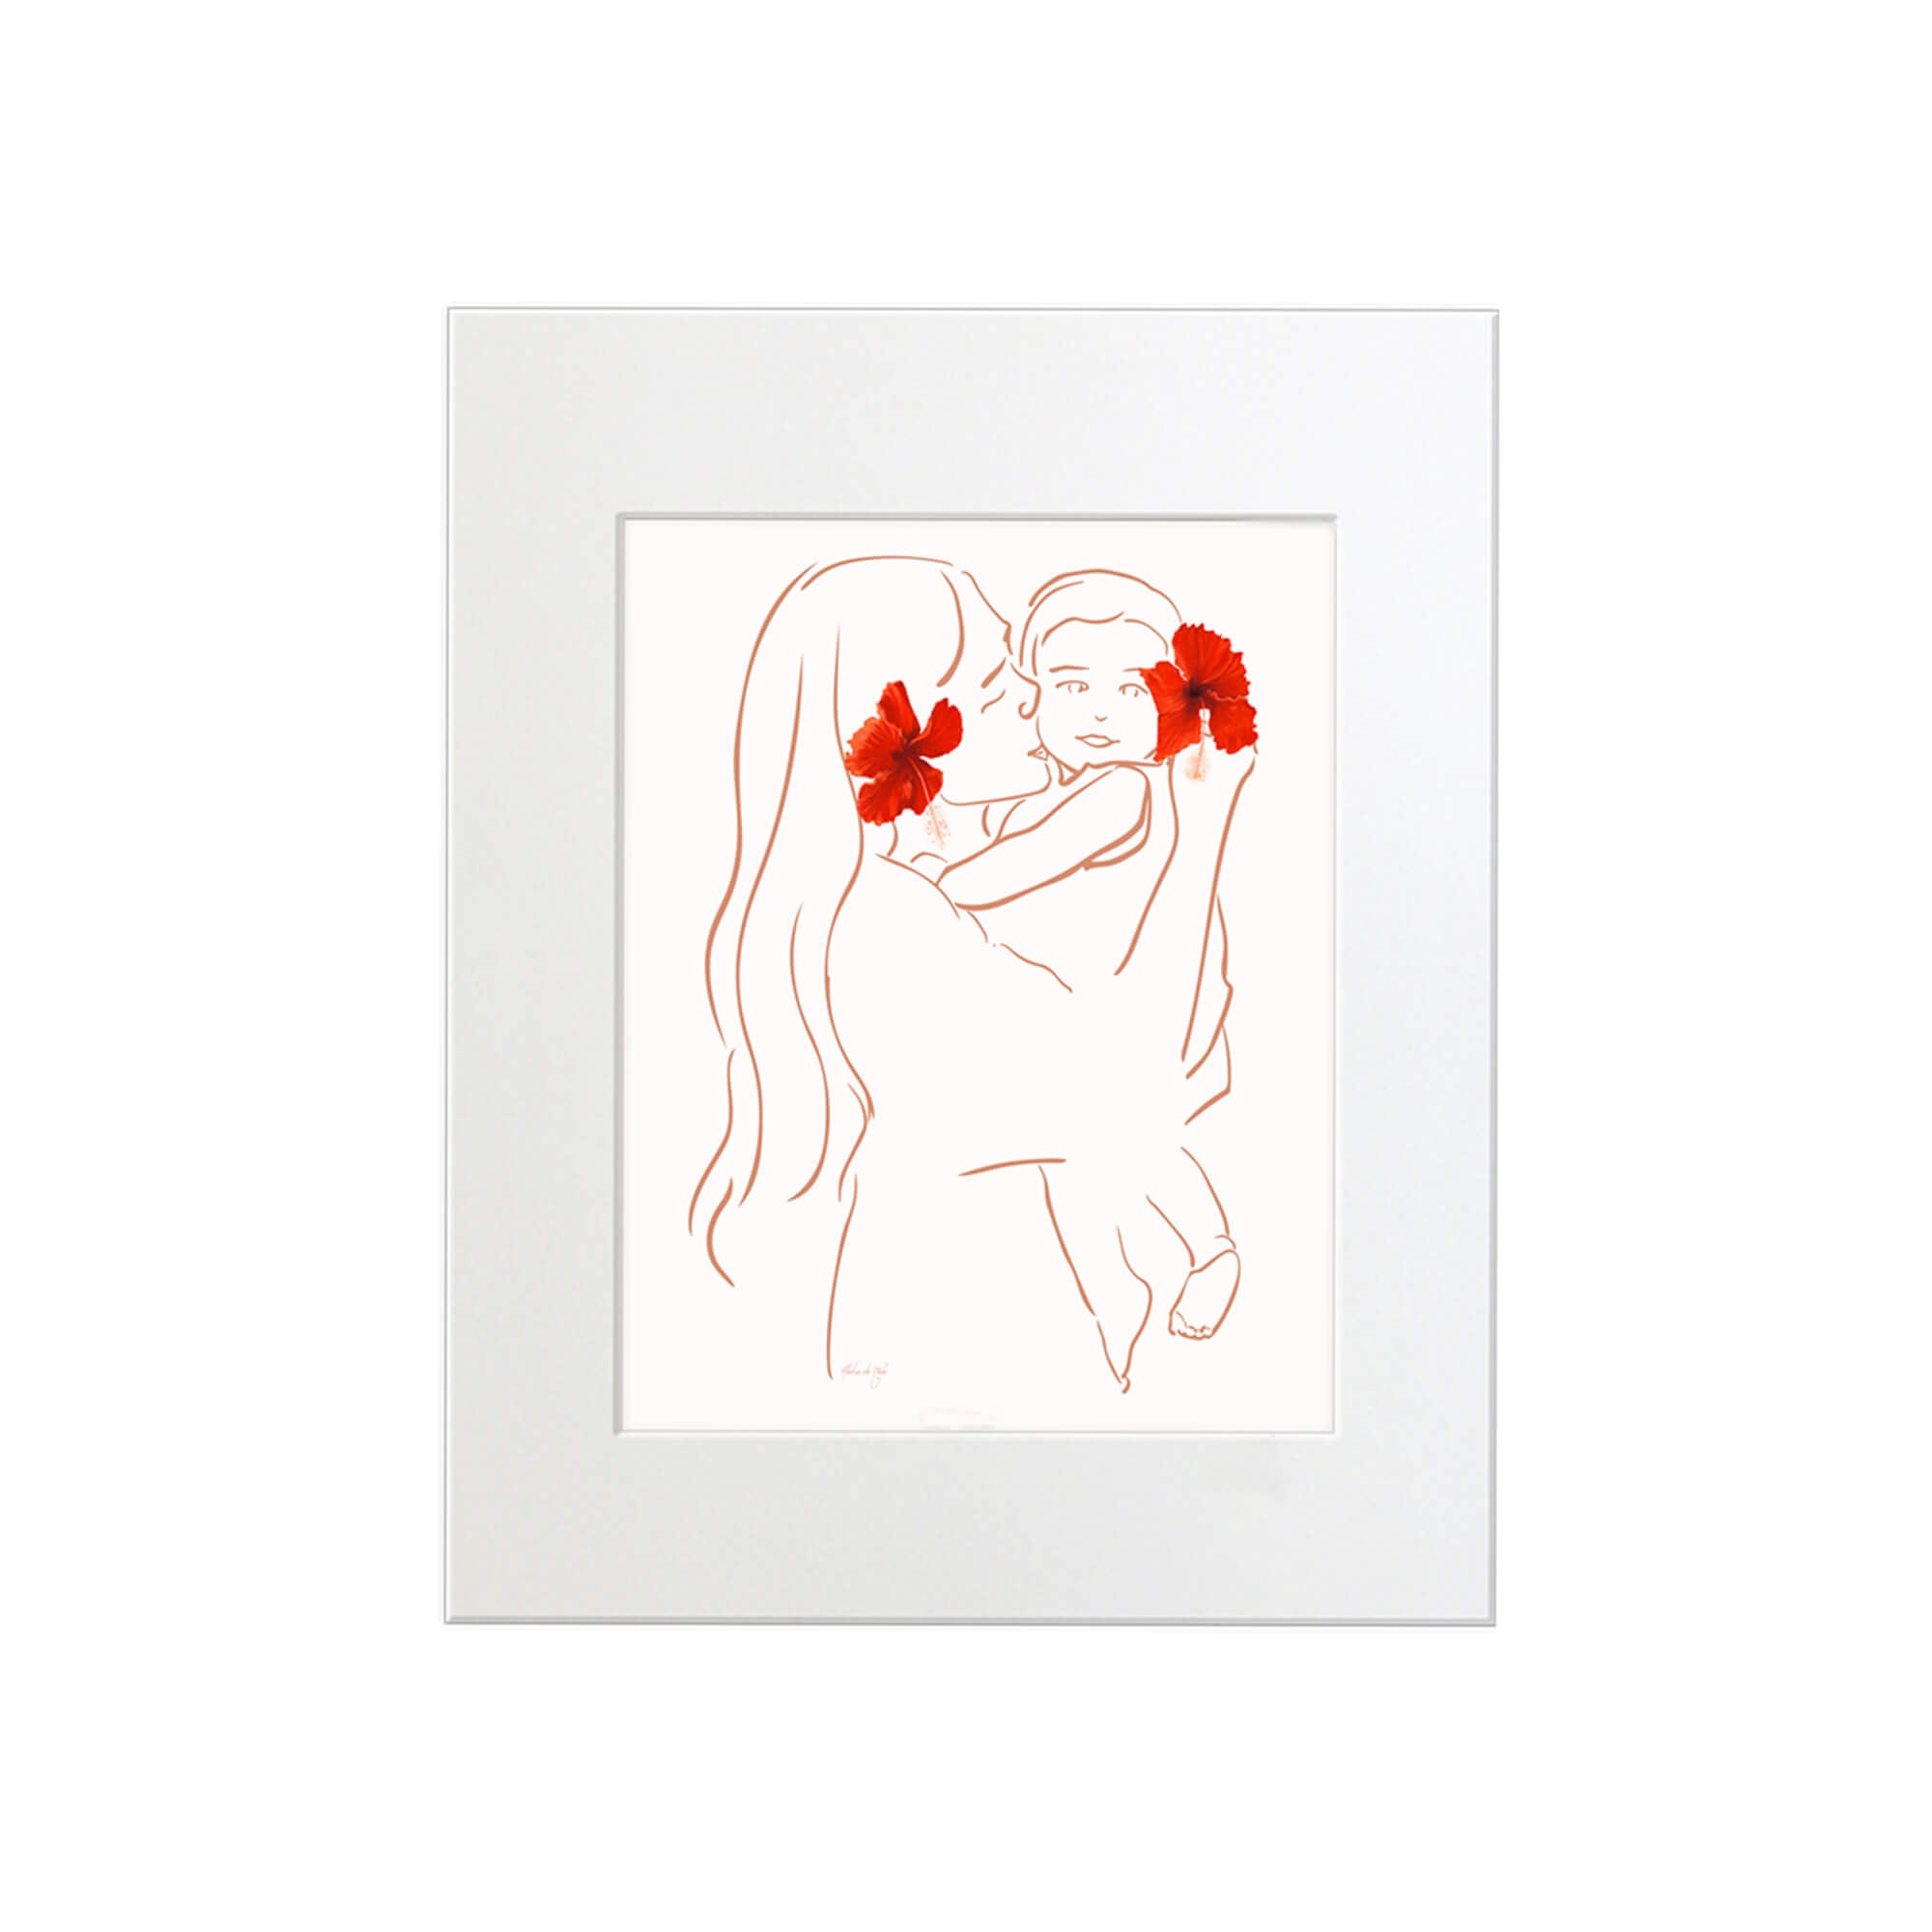 A matted art print of Matted art print featuring a mother holding her baby with vibrant red hibiscus flowers by Hawaii artist Aloha De Mele